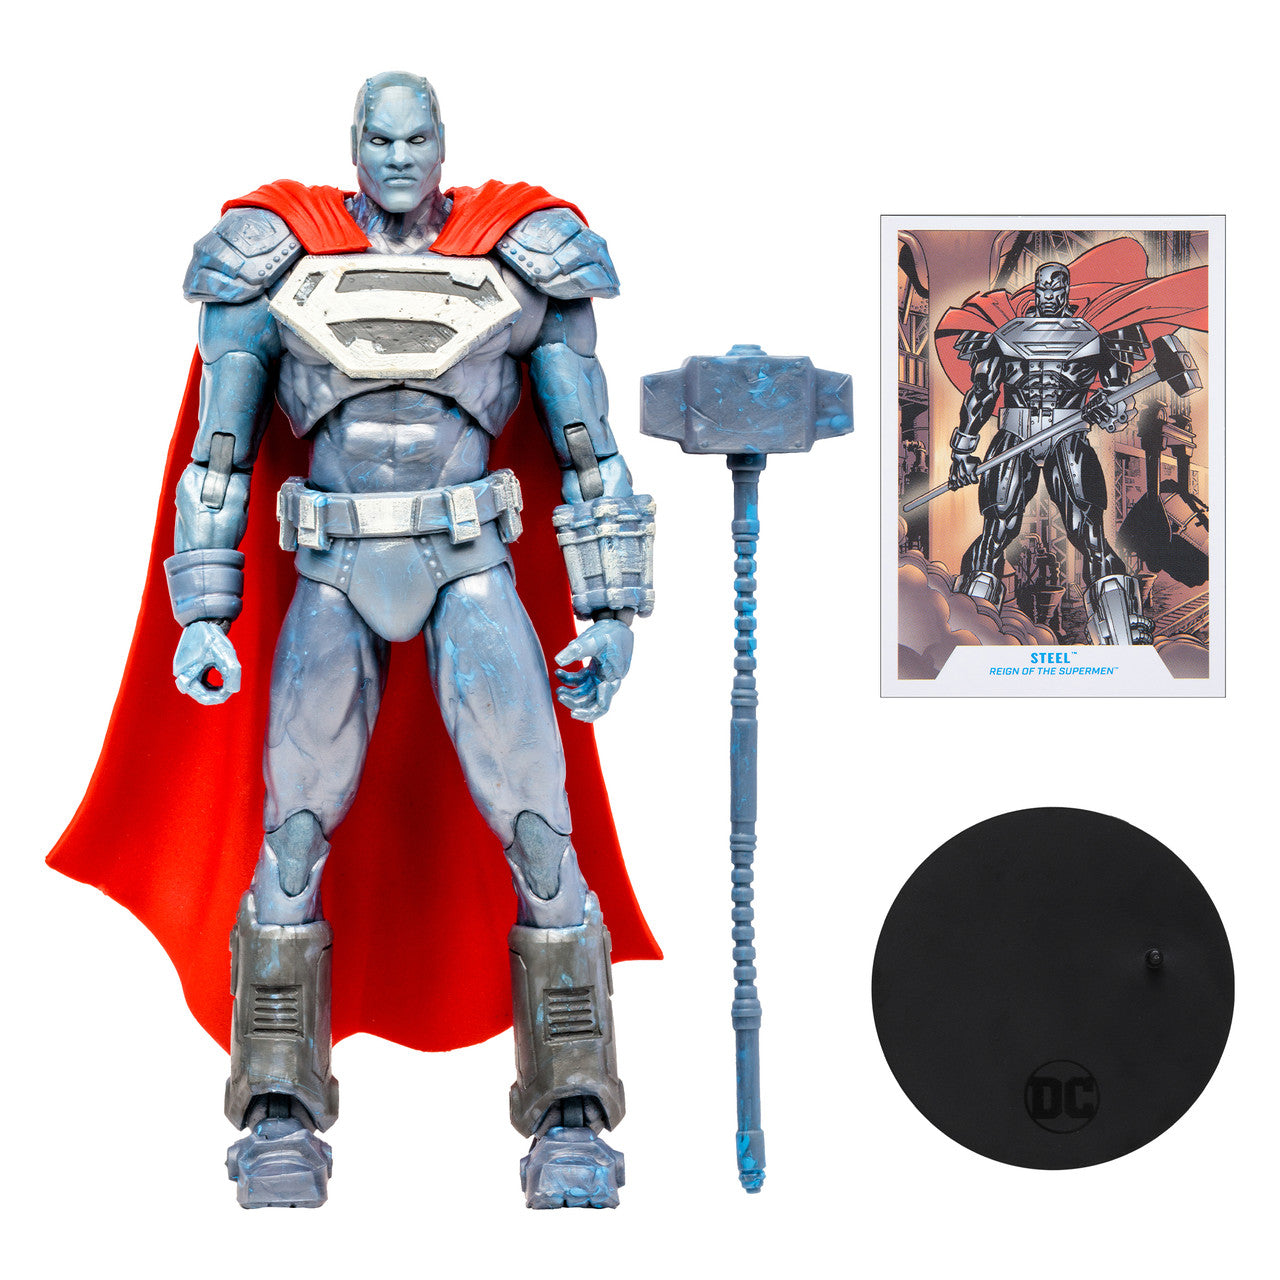 Steel (Reign of the Supermen) Figure by McFarlane